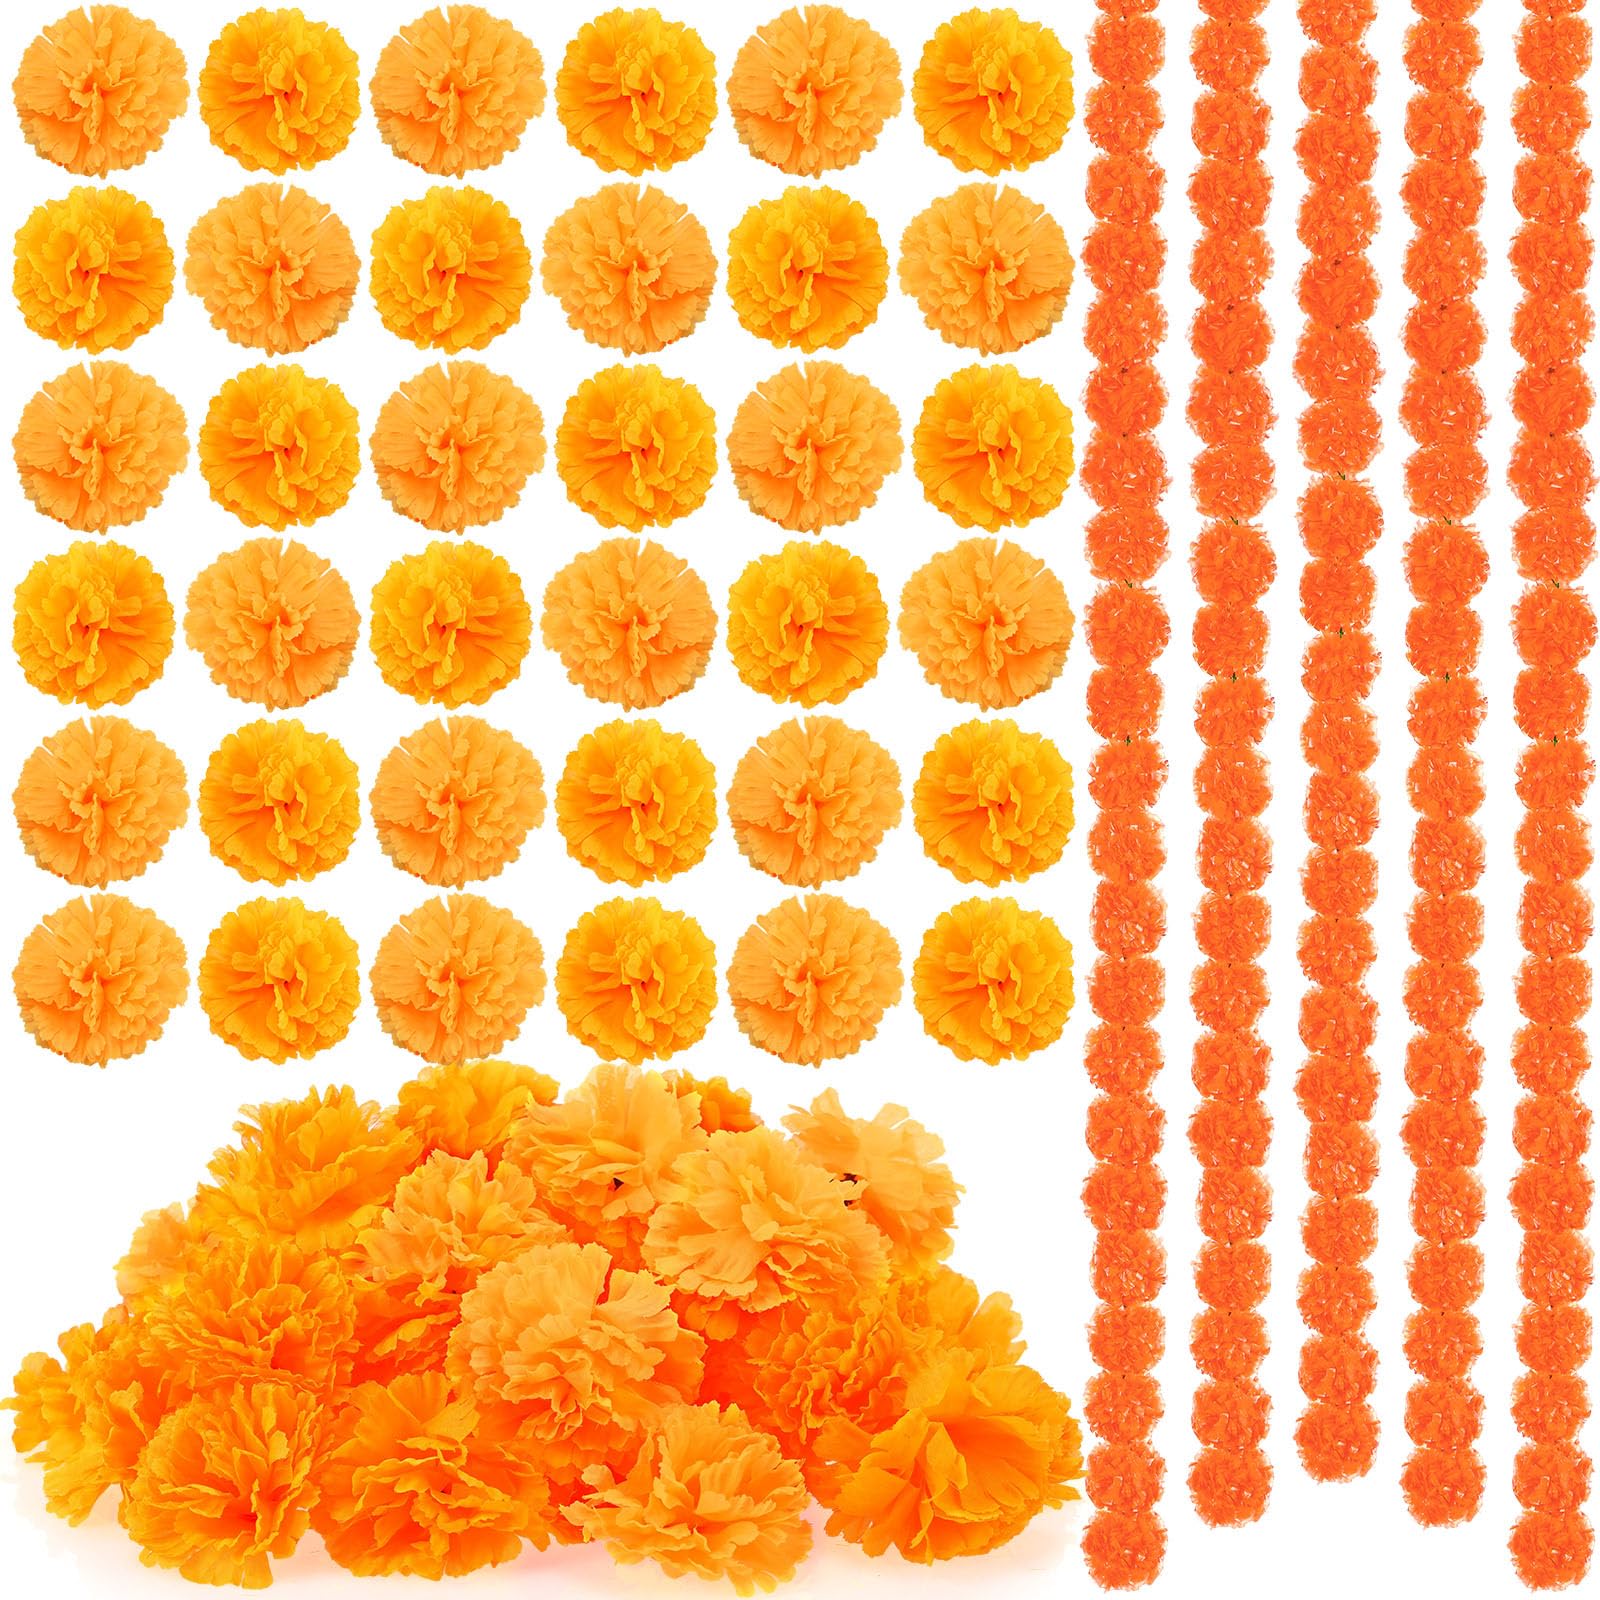 Yunsailing 65 Pcs Day of The Dead Decorations 5 Pcs 5 ft Artificial Marigold Garland 60 Pcs Faux Marigold Flower Heads Plastic Indian Garland Silk Indian Flowers for Decoration Diwali (Orange)